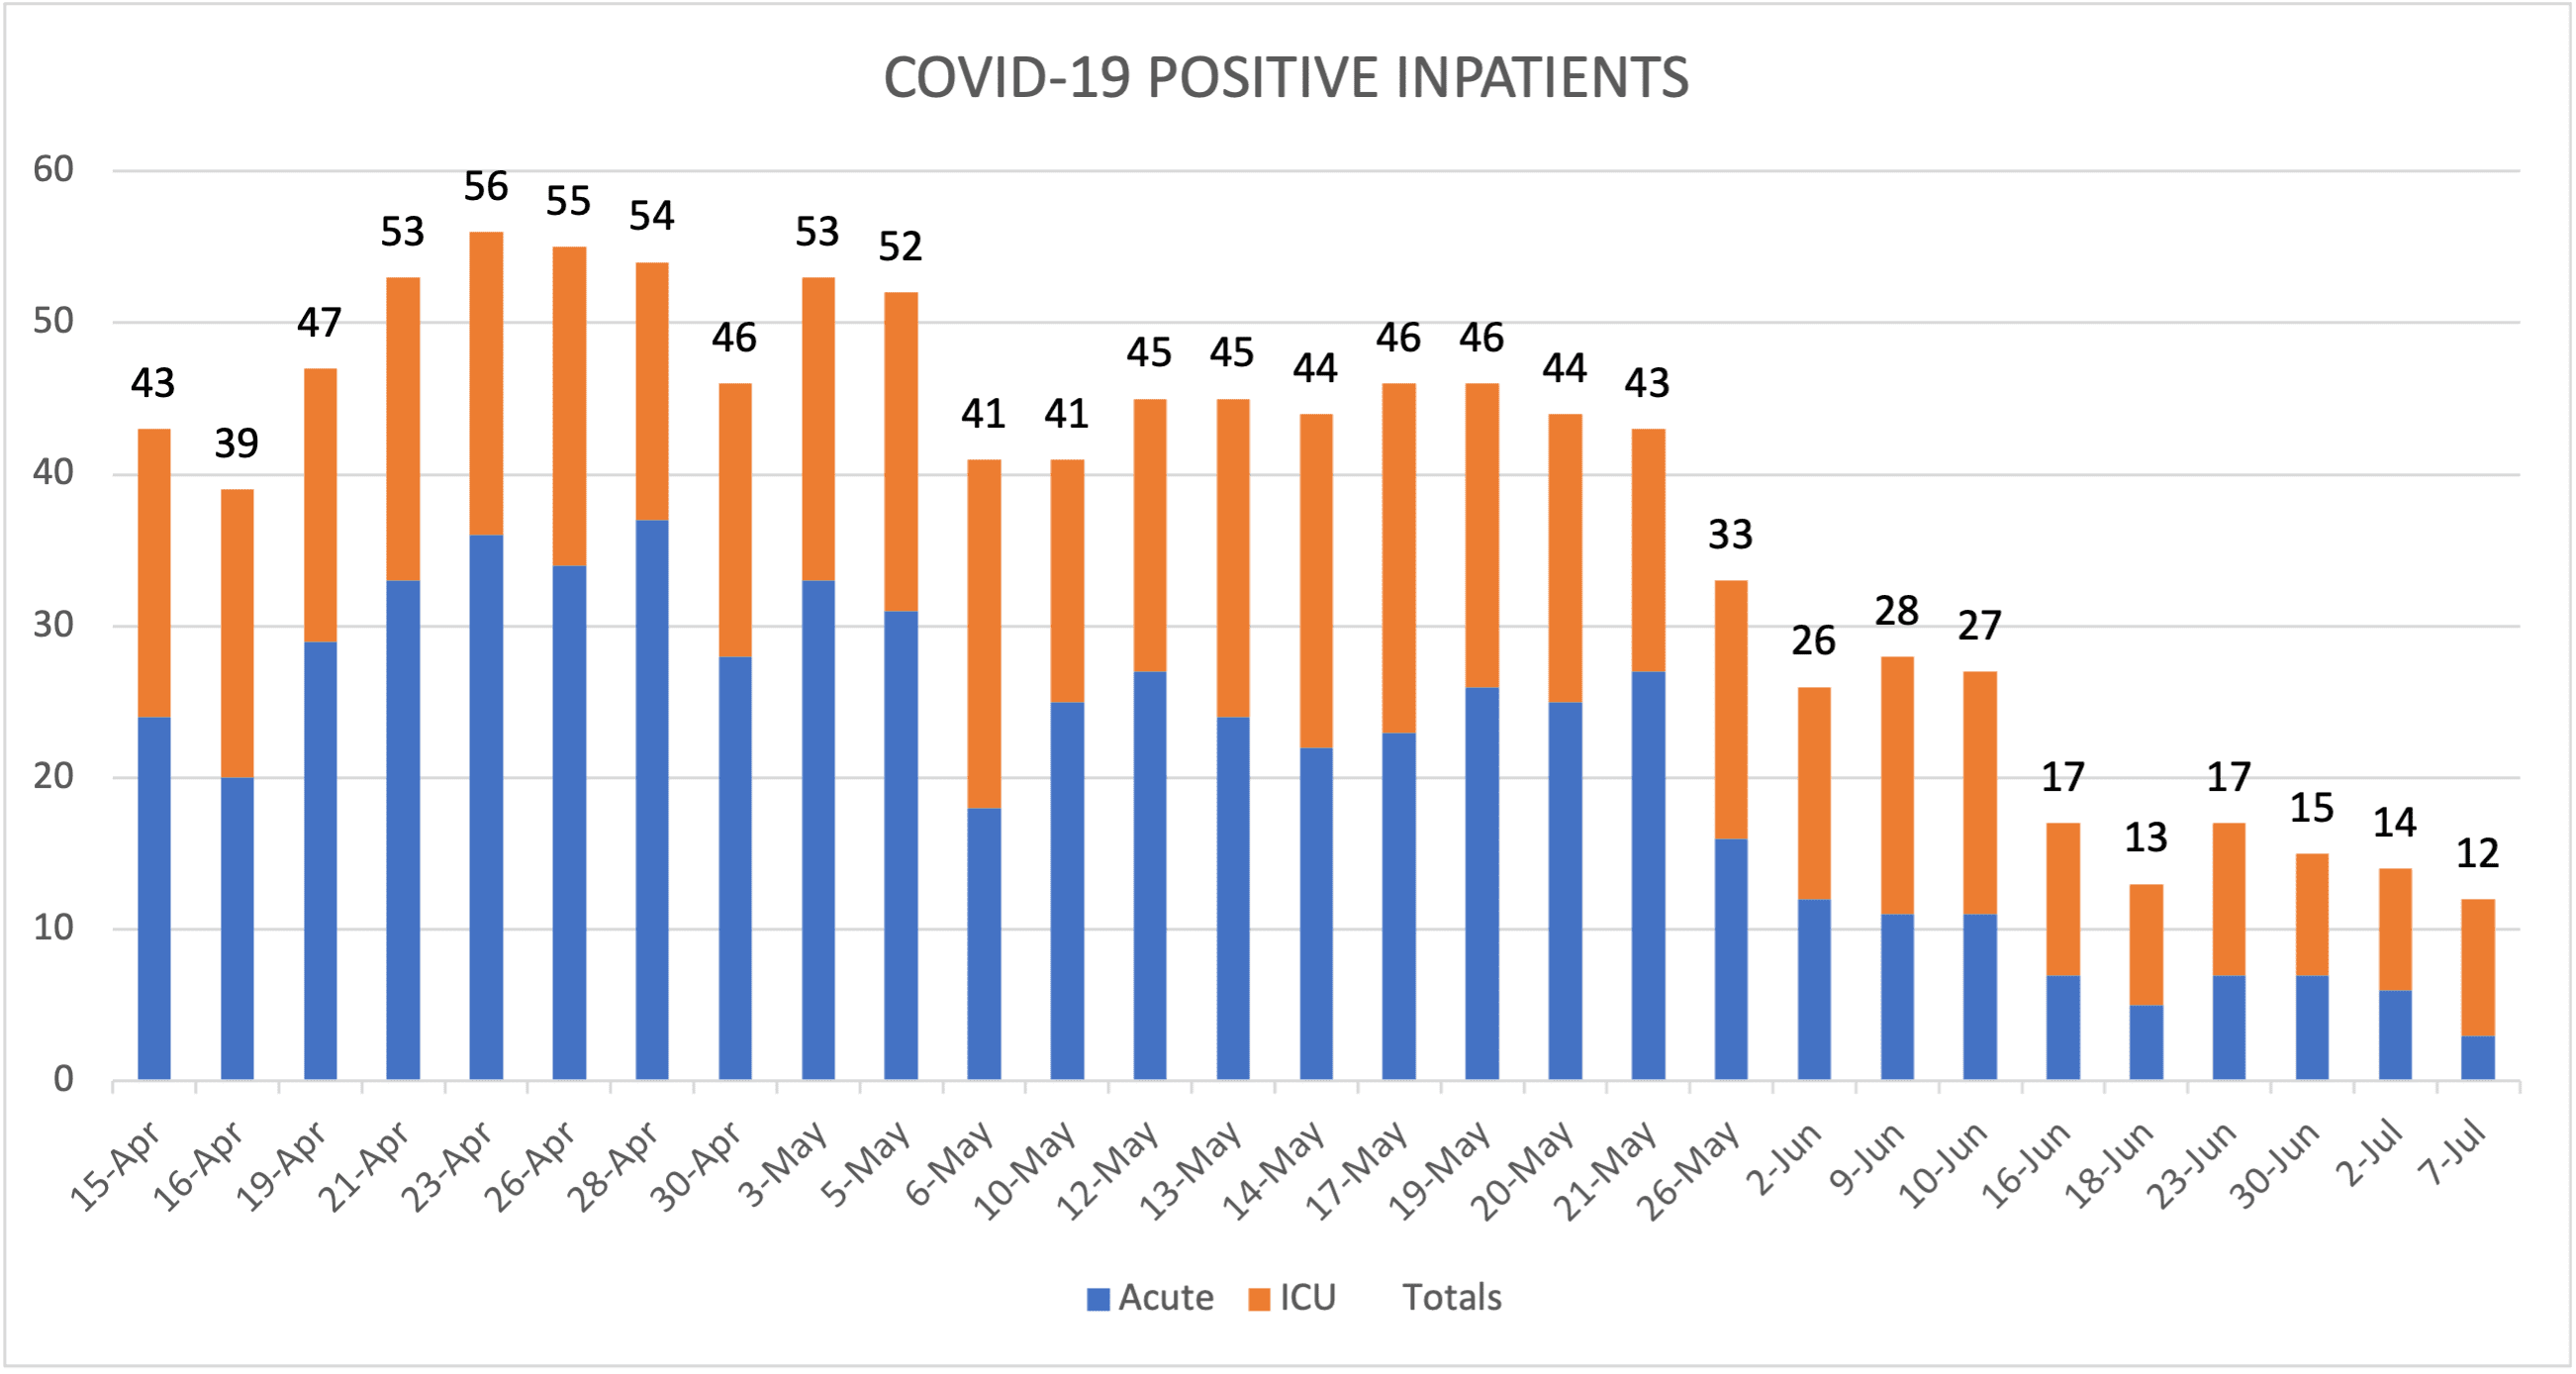 COVID-19 Positive Inpatients July 7 2021